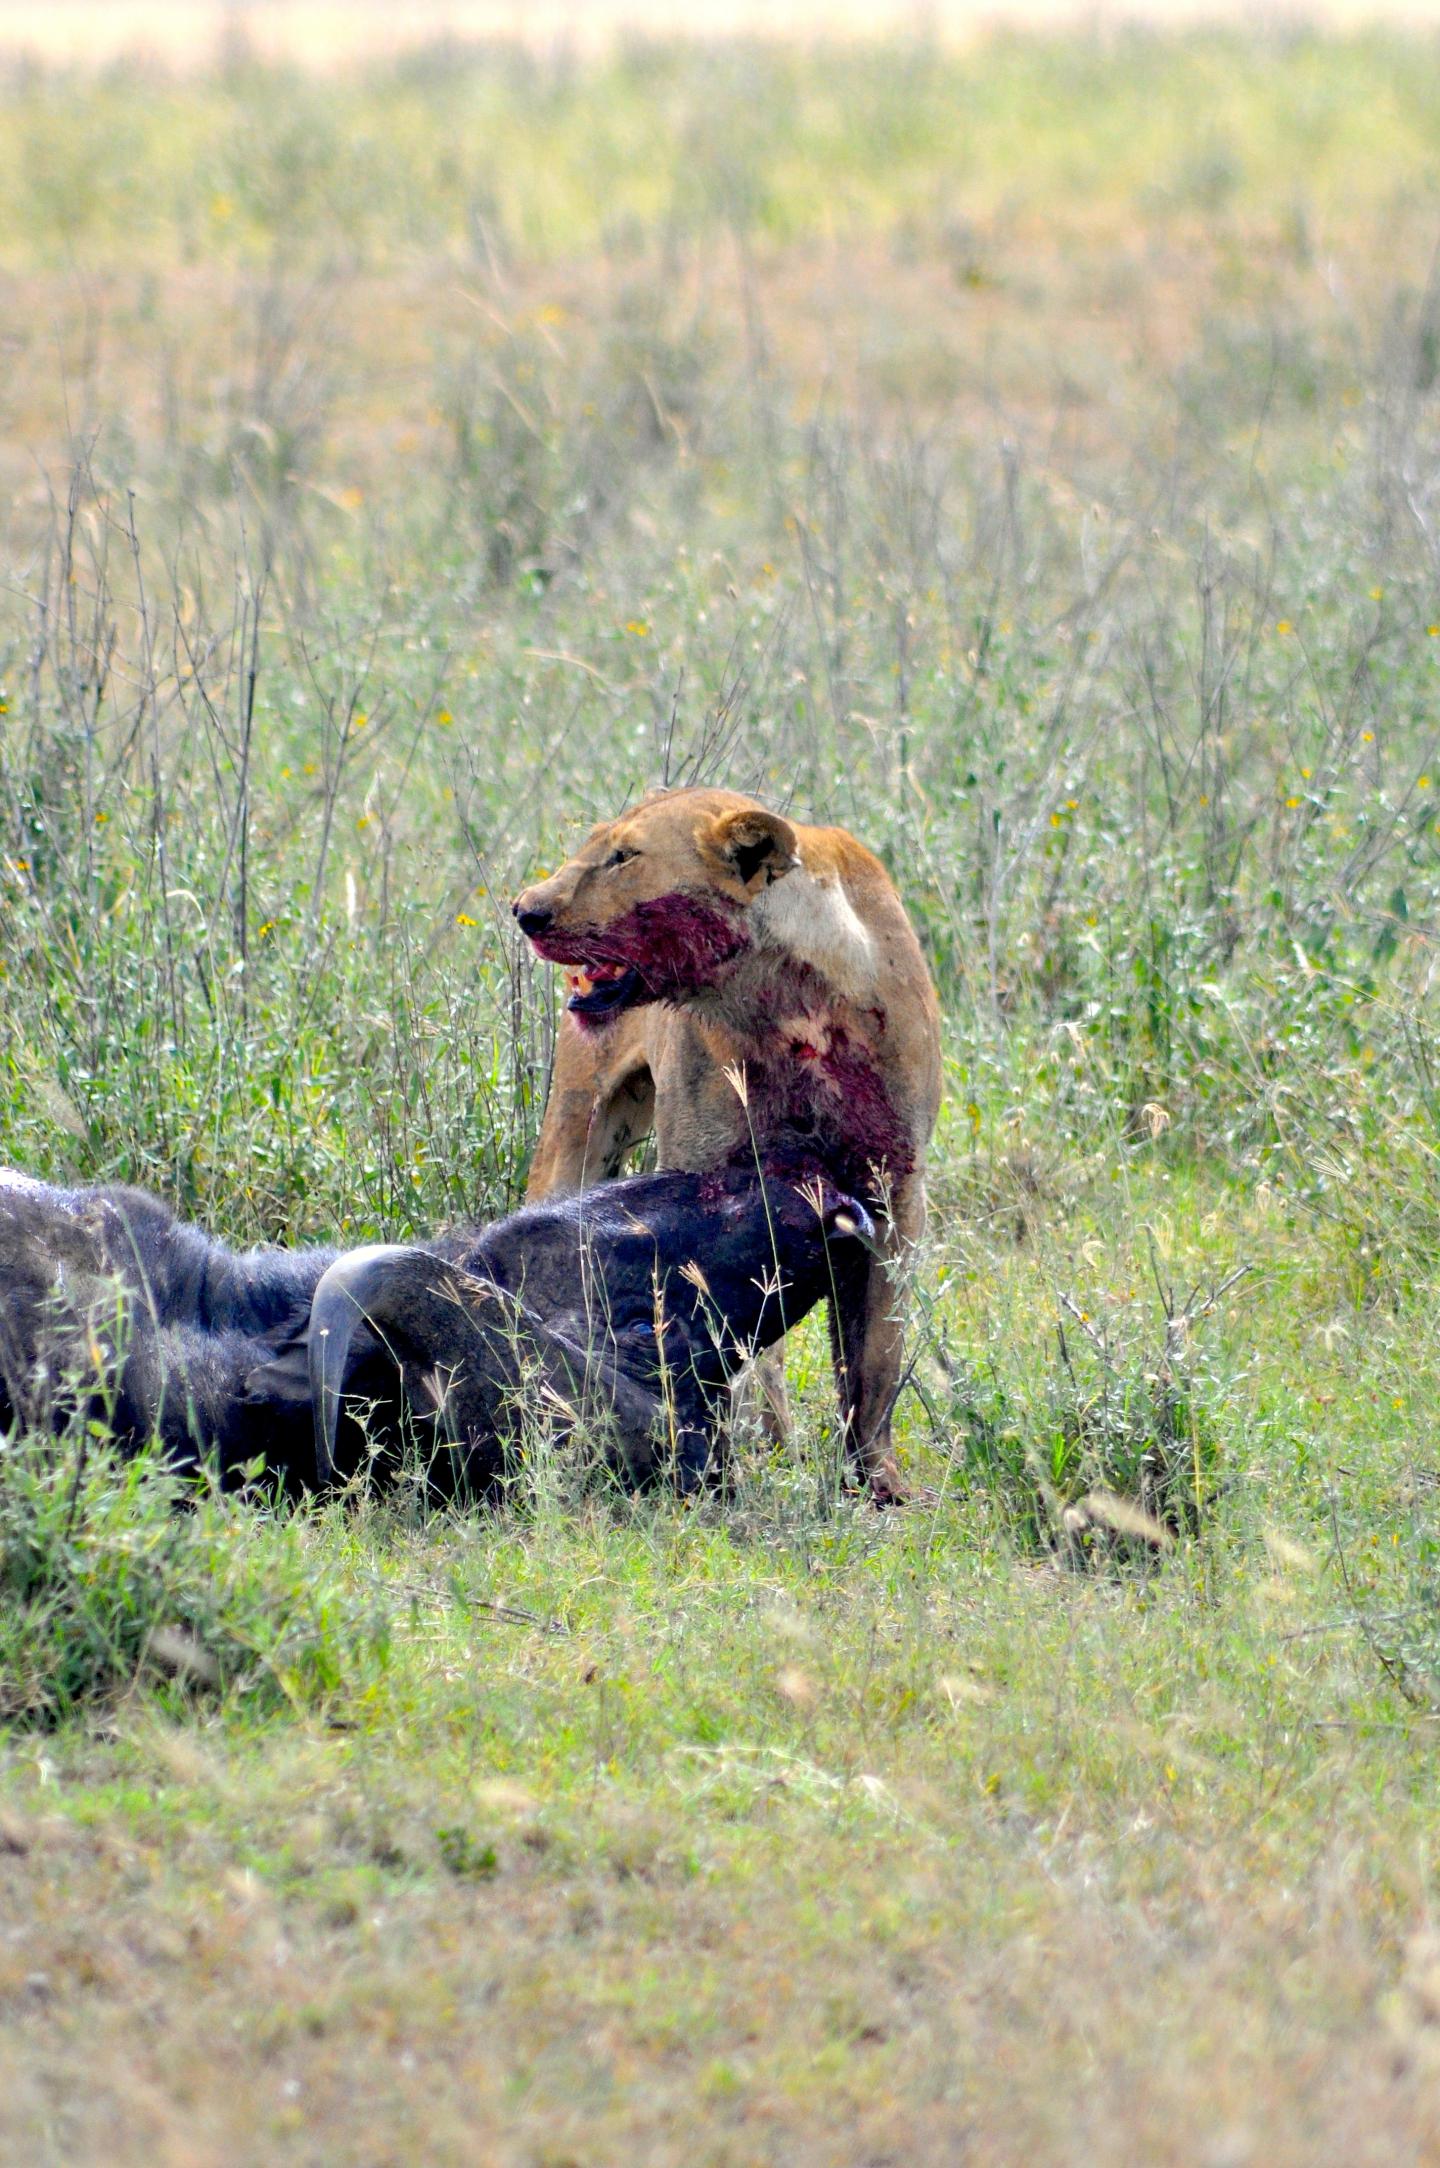 Buffalo Being Attacked by Lions in Serengeti National Park (2 of 2)